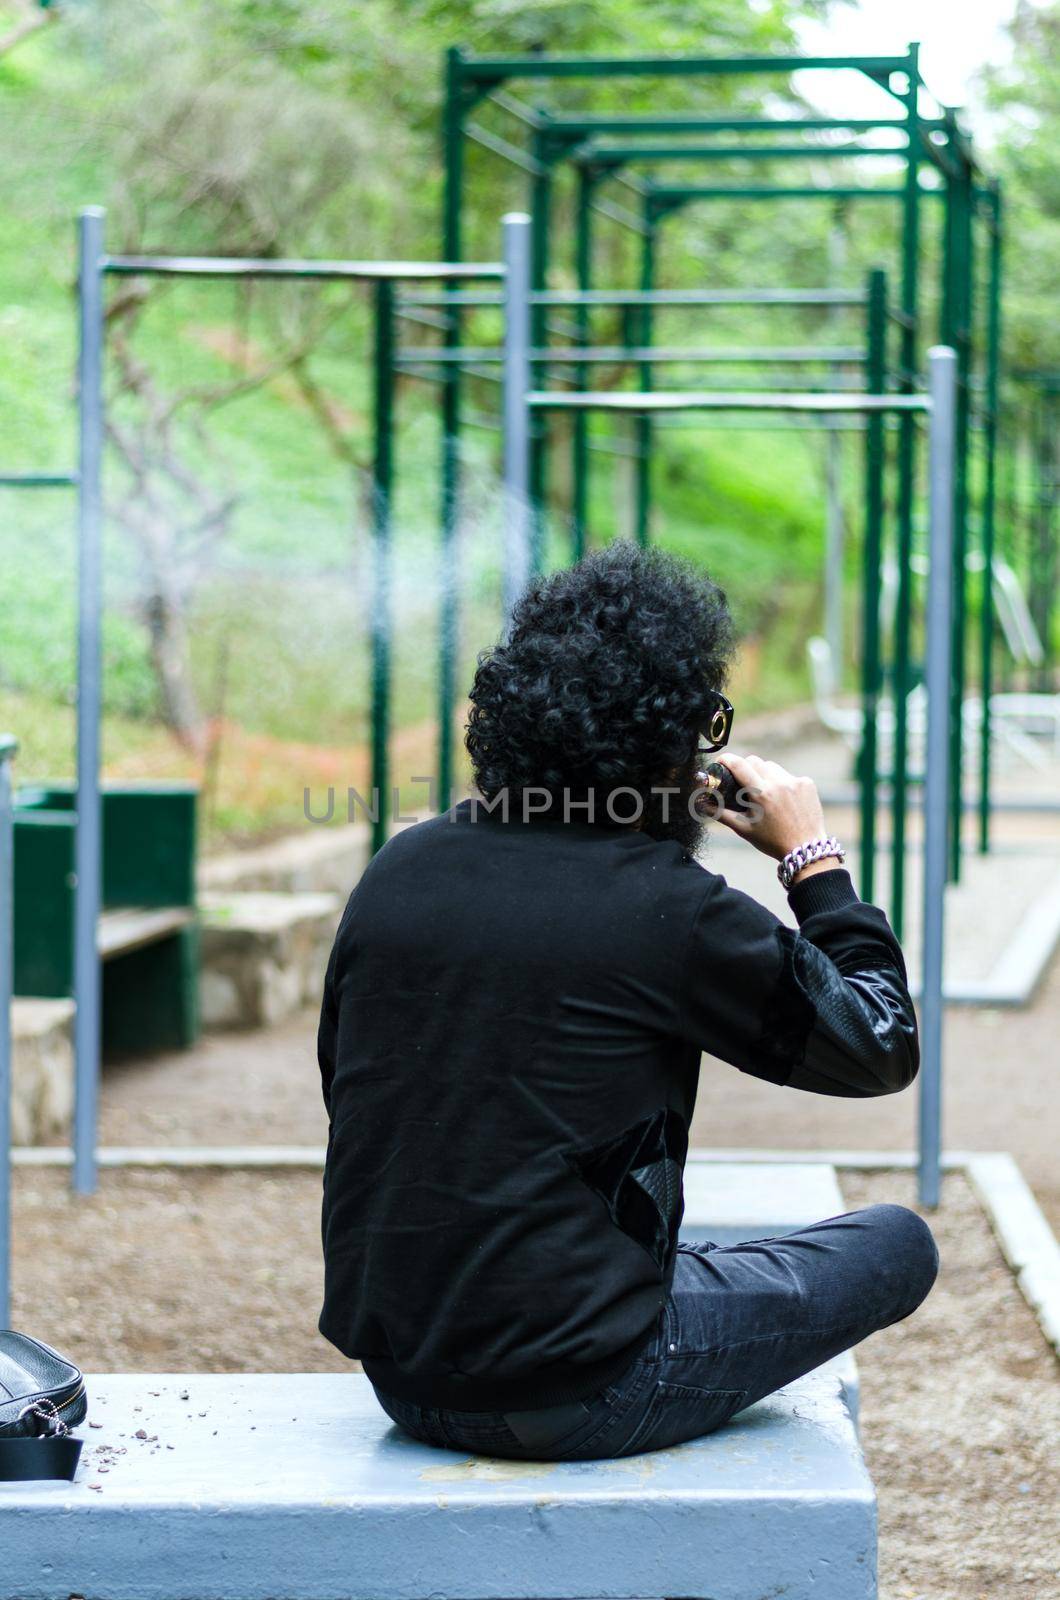 Man with beard smoking electronic sigarette outdoor. by Peruphotoart